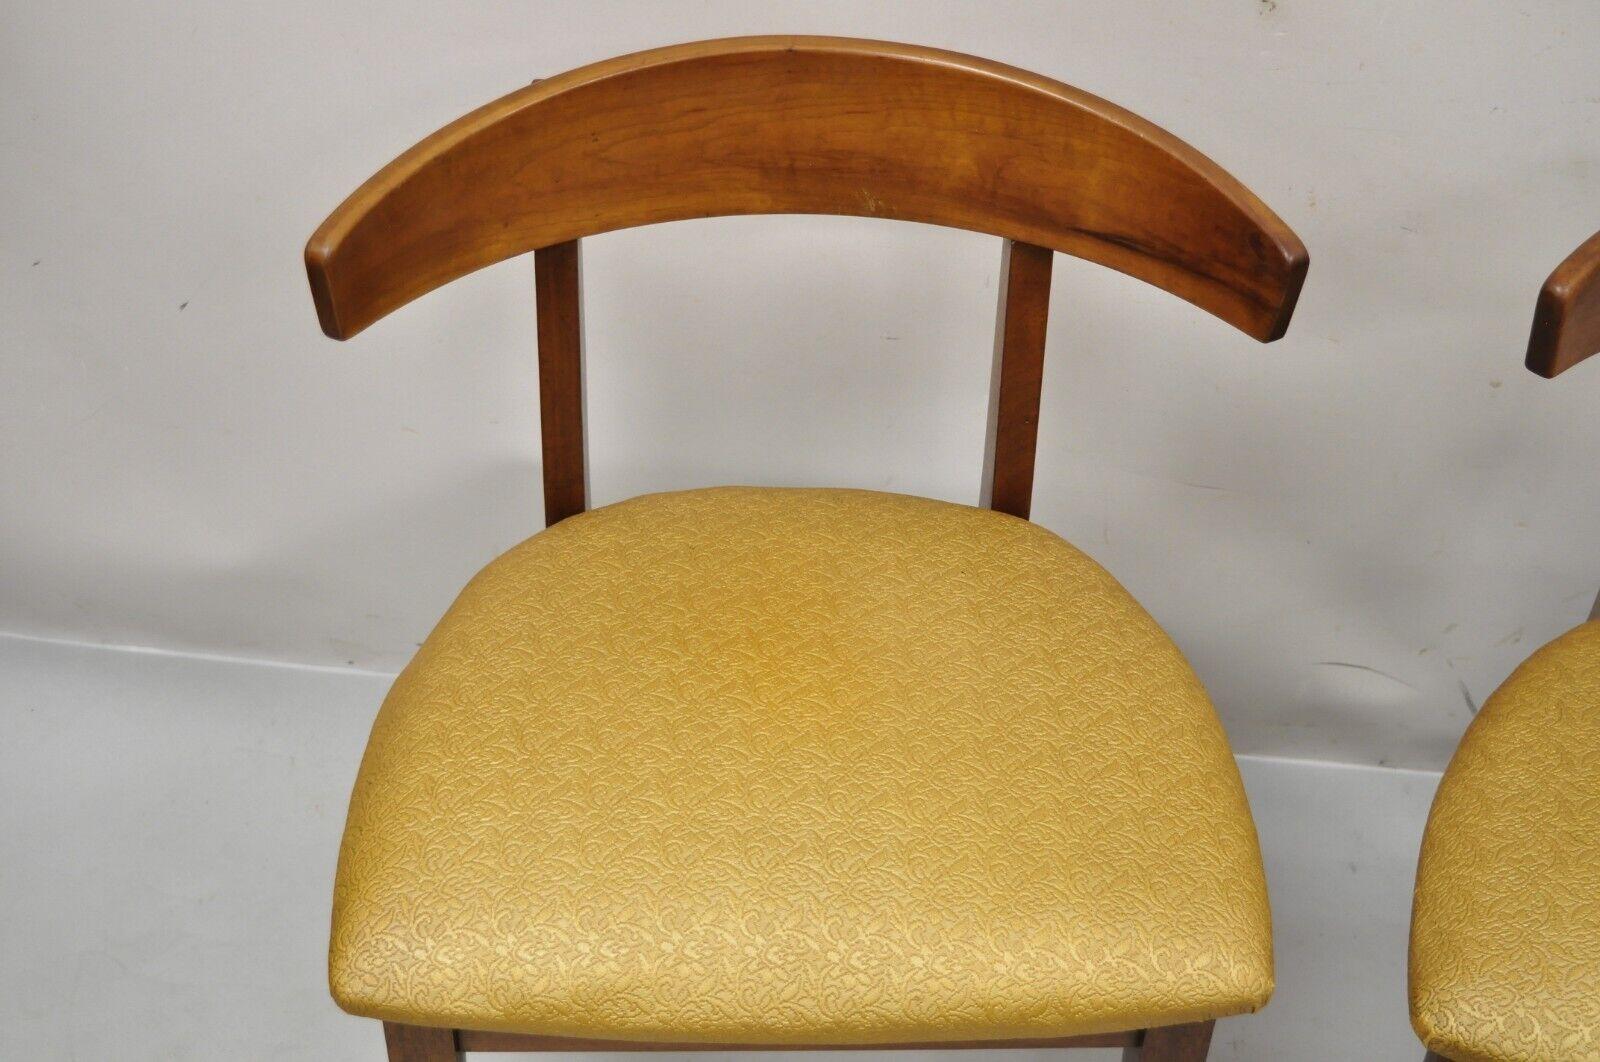 20th Century Mid-Century Modern Cherry Wood Curved Back Hoof Leg Side Chair, a Pair For Sale